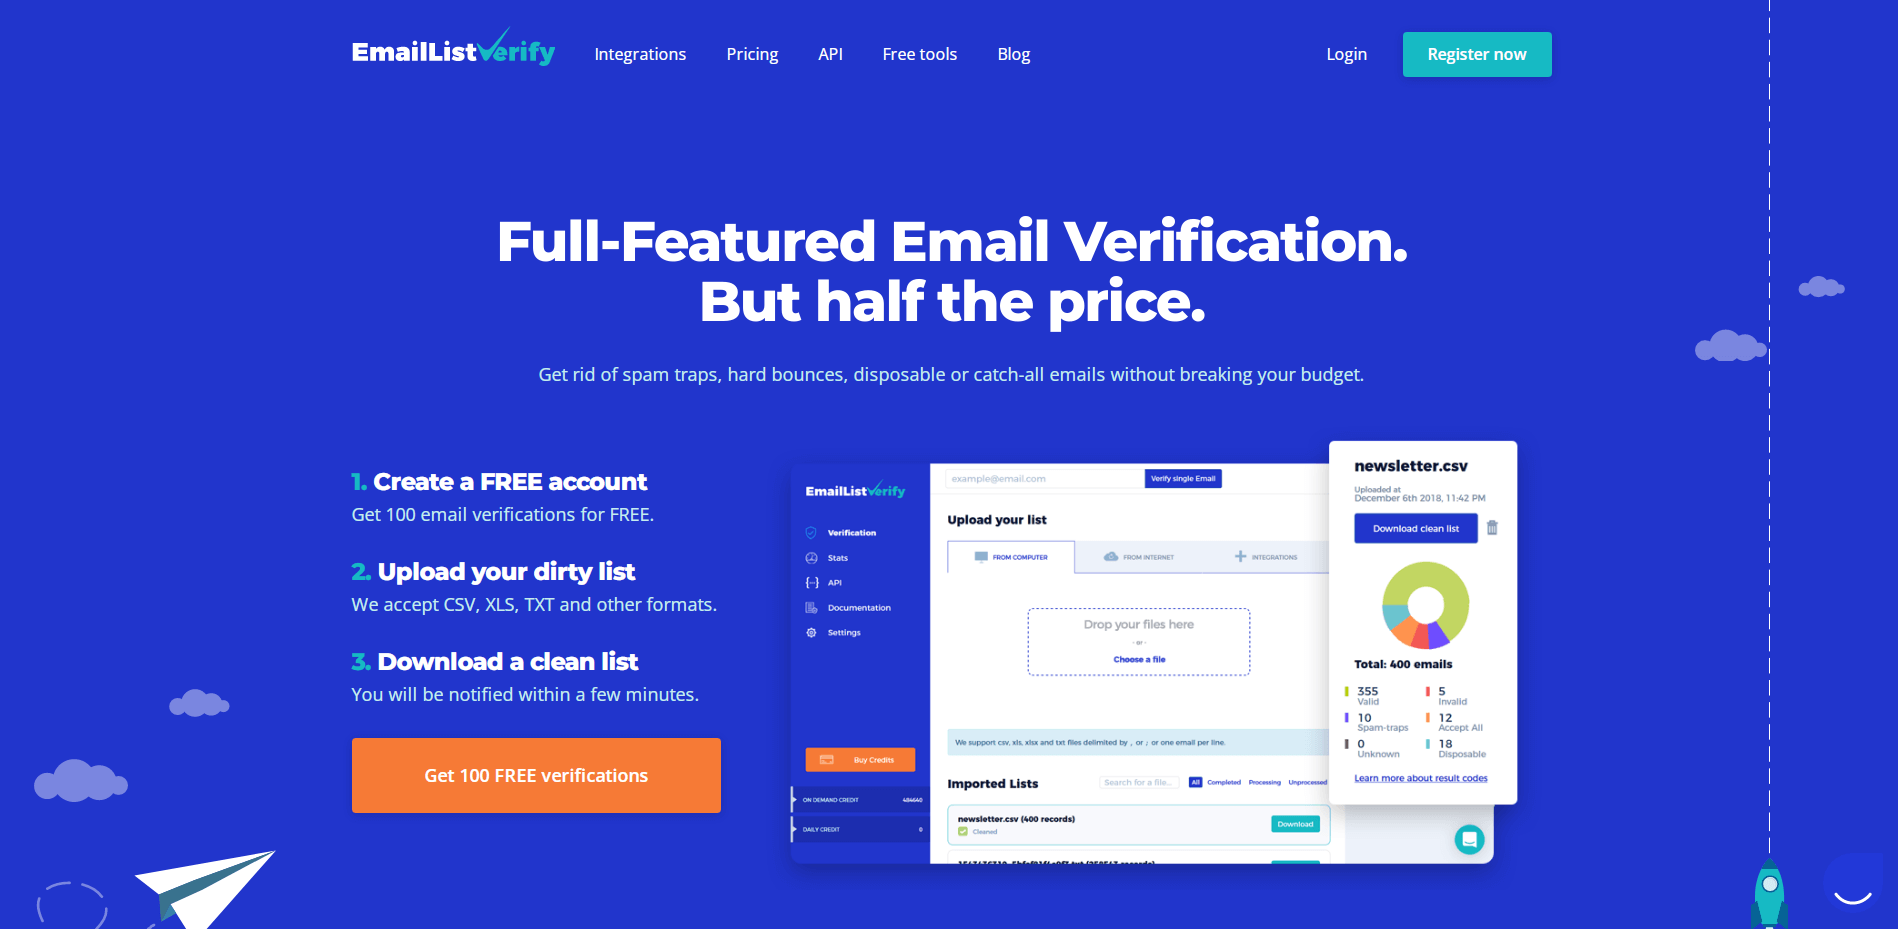 emaillistverify-main-page